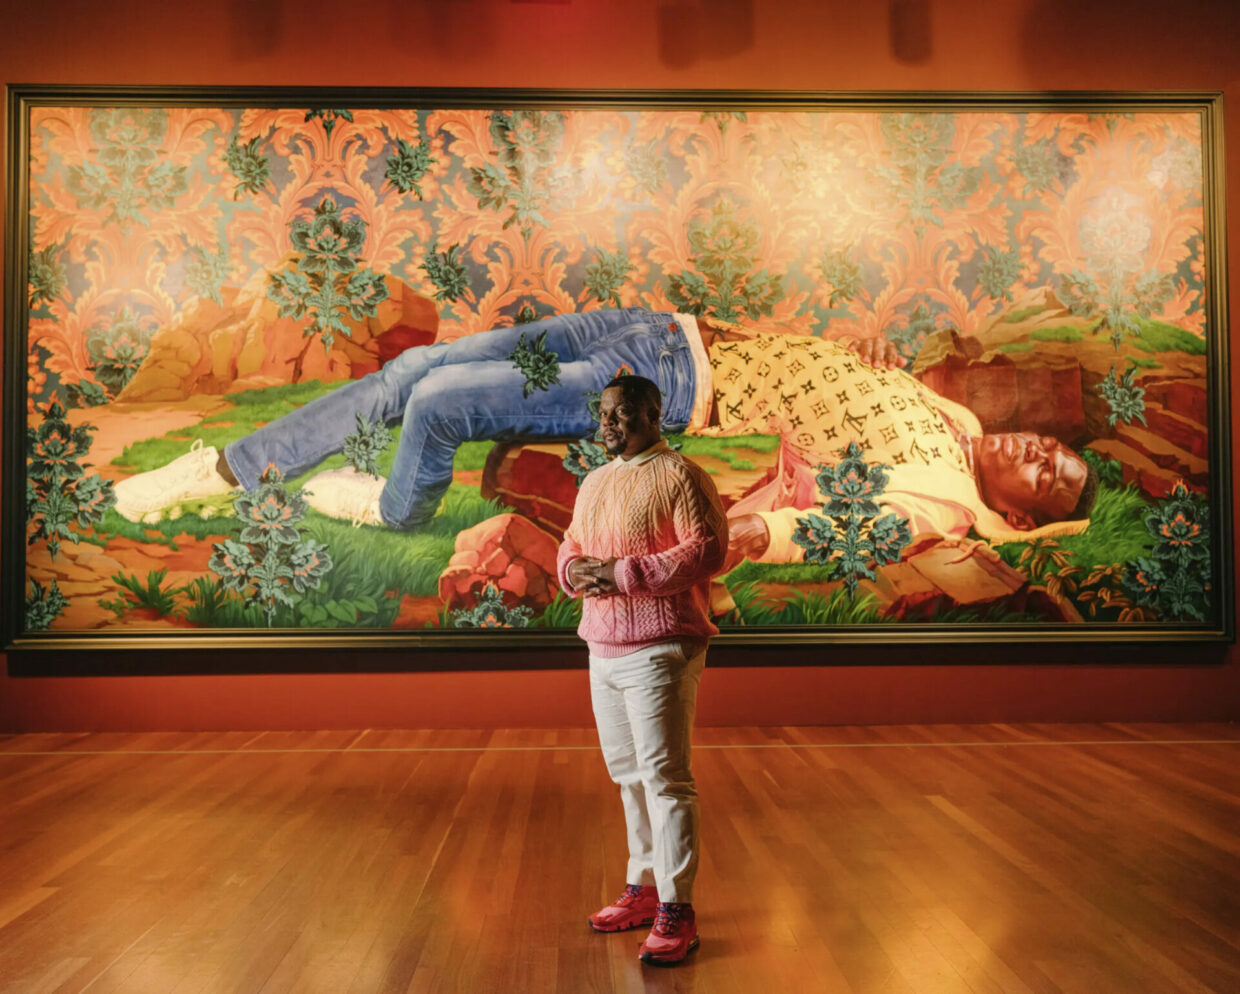 Kehinde Wiley at “An Archaeology of Silence” at the de Young Museum in San Francisco with his monumental 2022 painting, “Femme piquée par un serpent (Mamadou Gueye).” Works were made in response to the killings of Black men and women — “bodies chopped down,” the artist said. This one nods to an 1847 sculpture “Woman Bitten by a Serpent” by Auguste Clésinger.